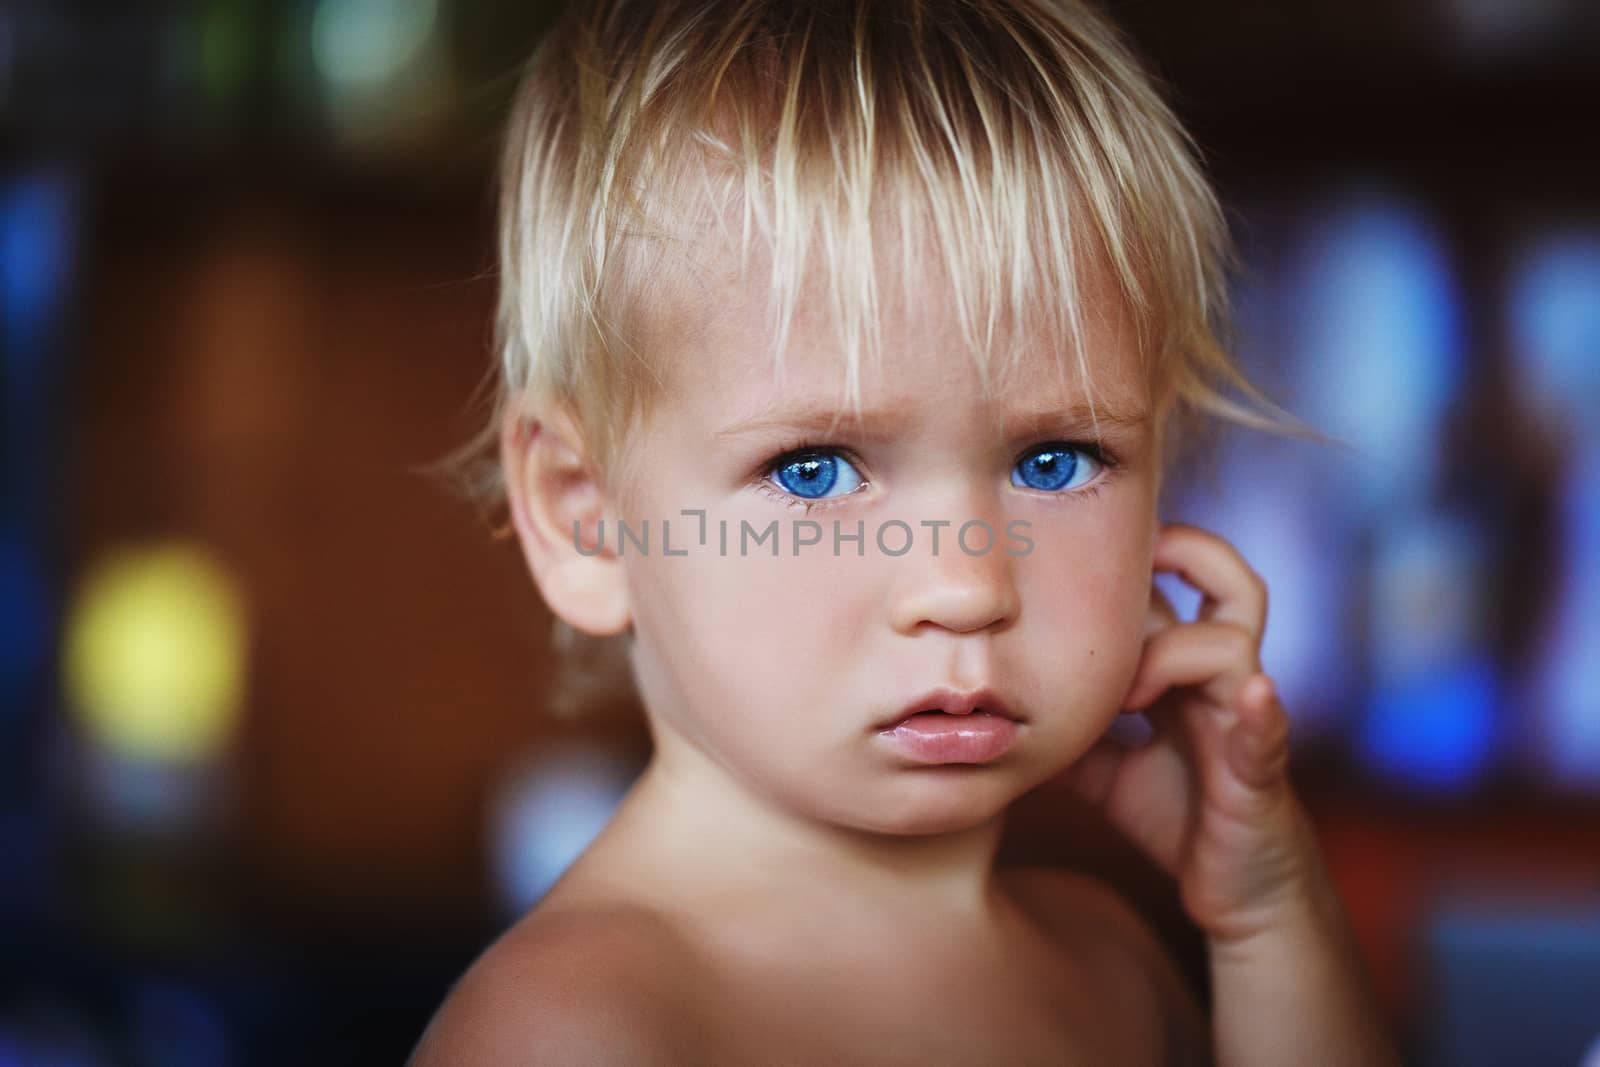 beauty blonde young boy by gorov108